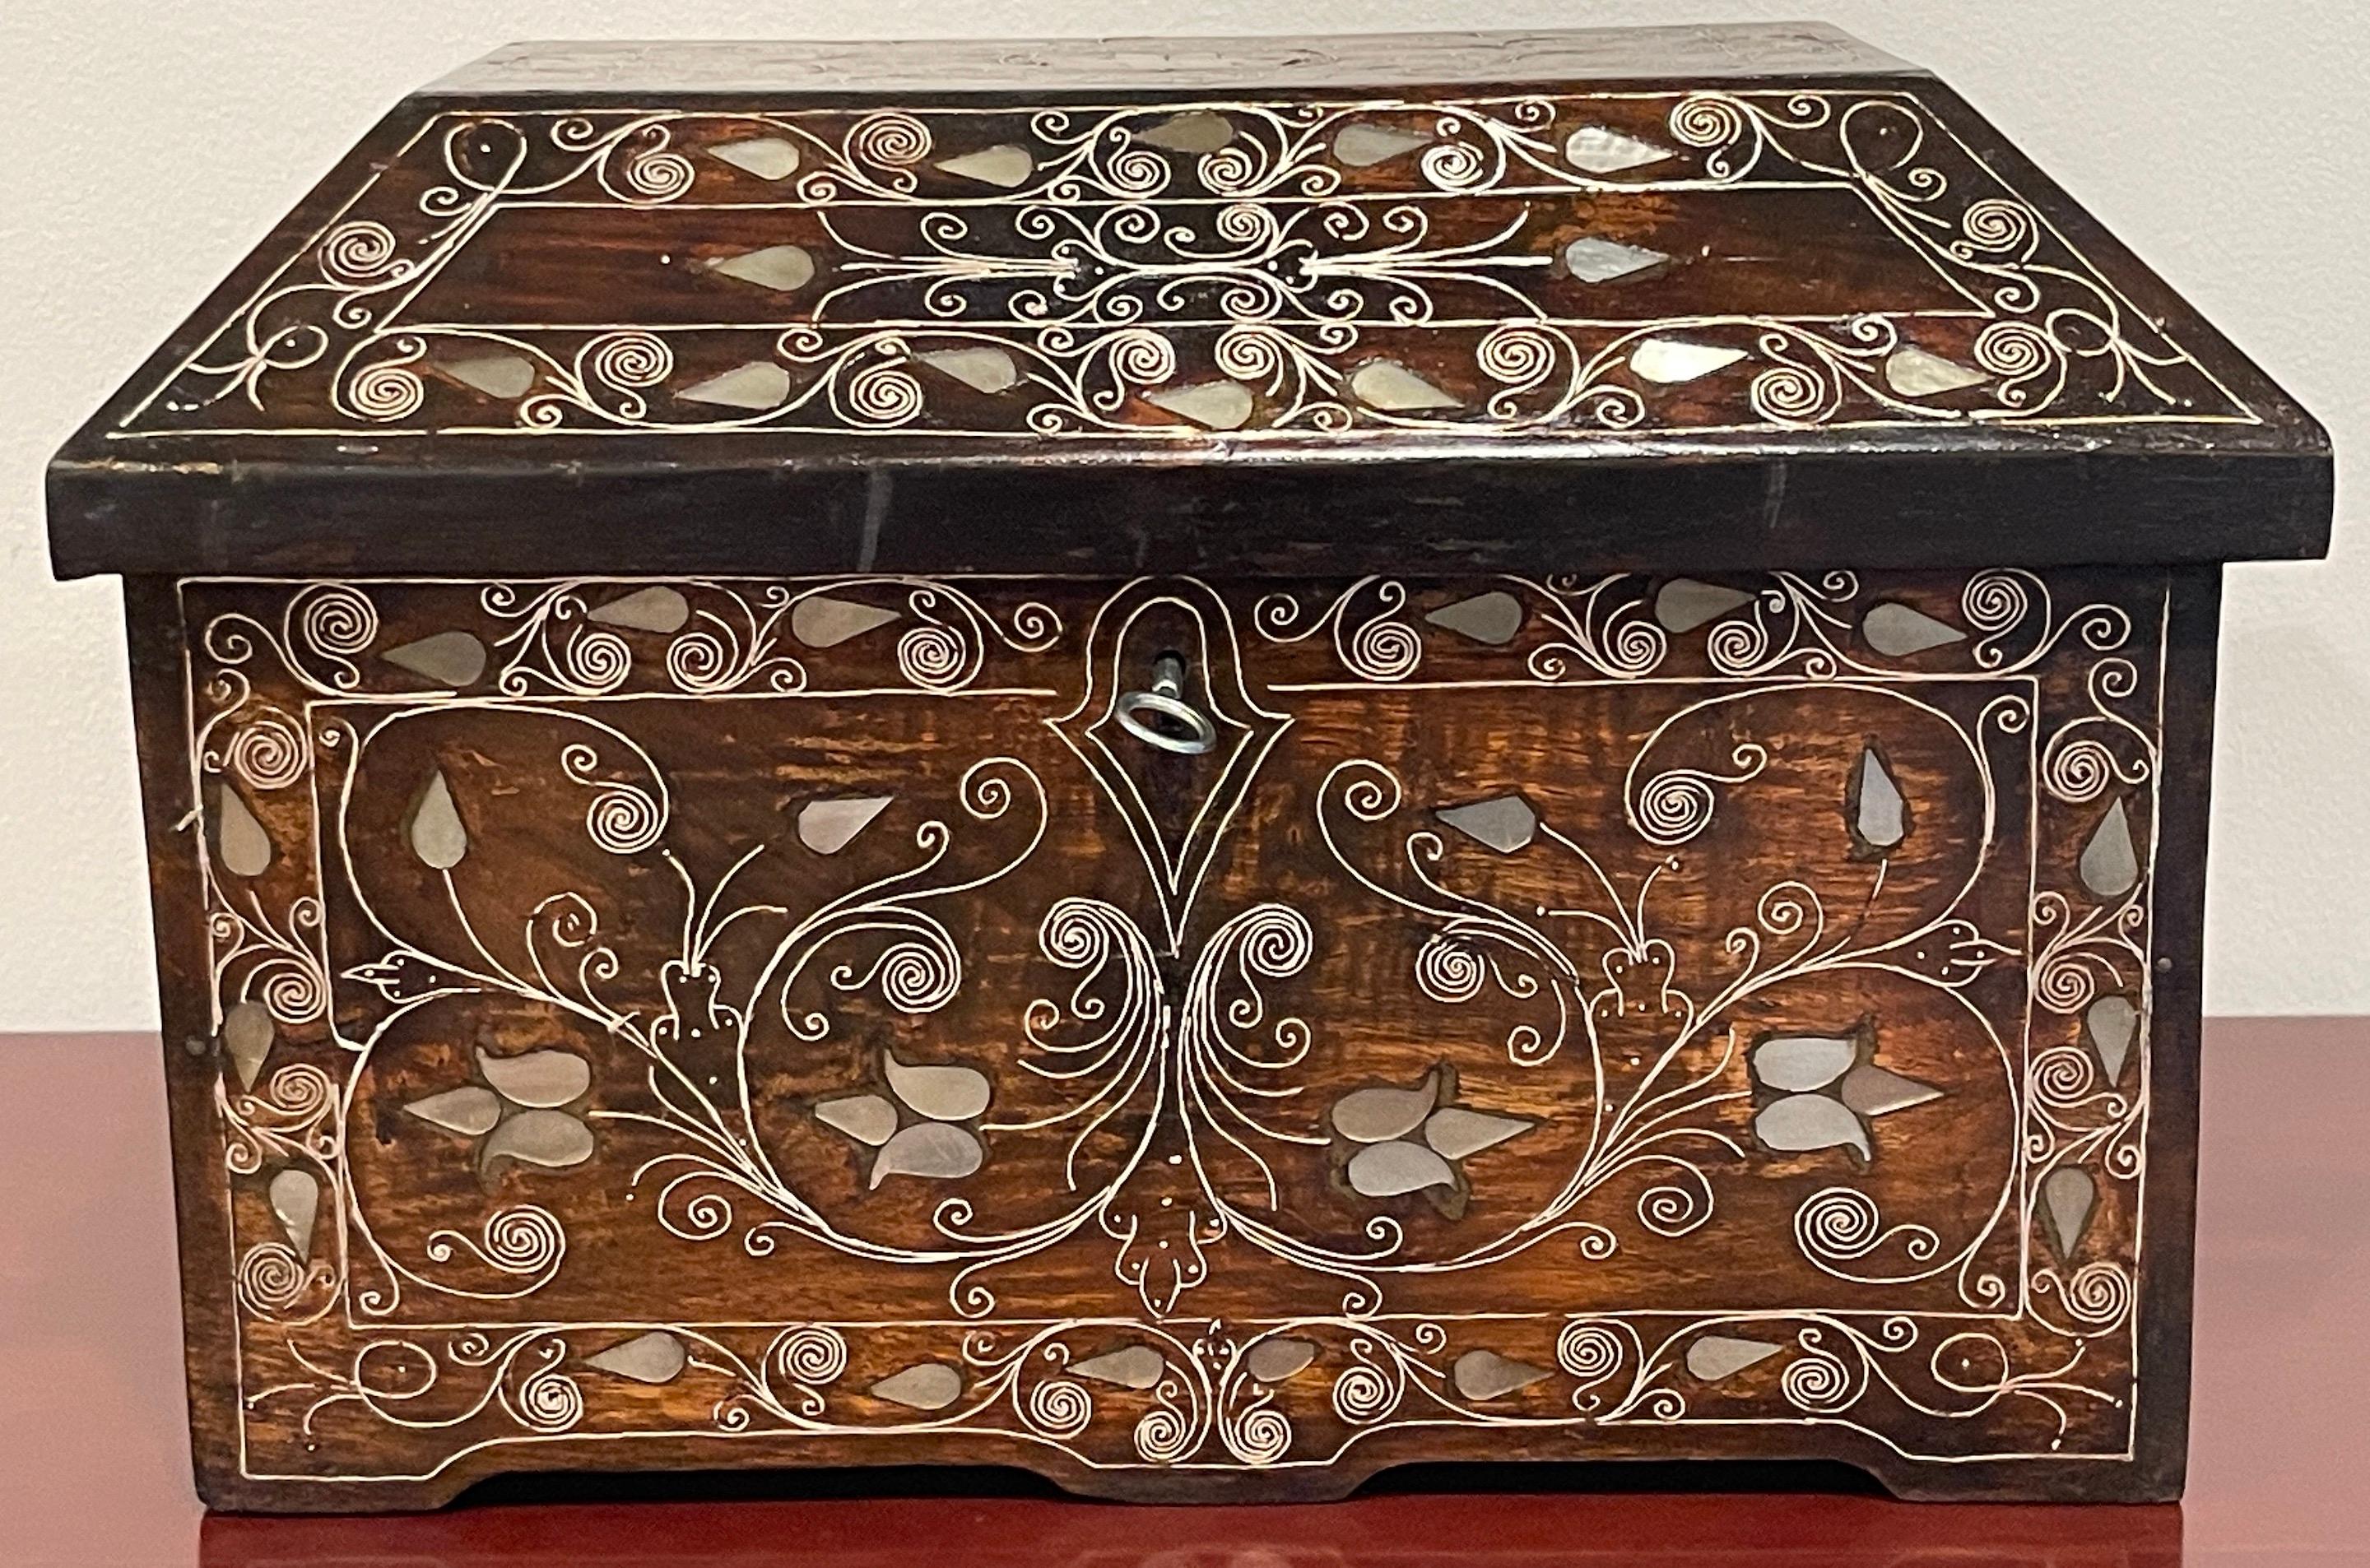 Anglo-Indian Mother of Pearl Inlaid Trunk/Box 
India, Lat 19th Century 
Either a diminutive trunk or a large table box, the size and scale is impressive. This work crafted in rich warm hardwood,  shimmers with the profuse inlay including mother of